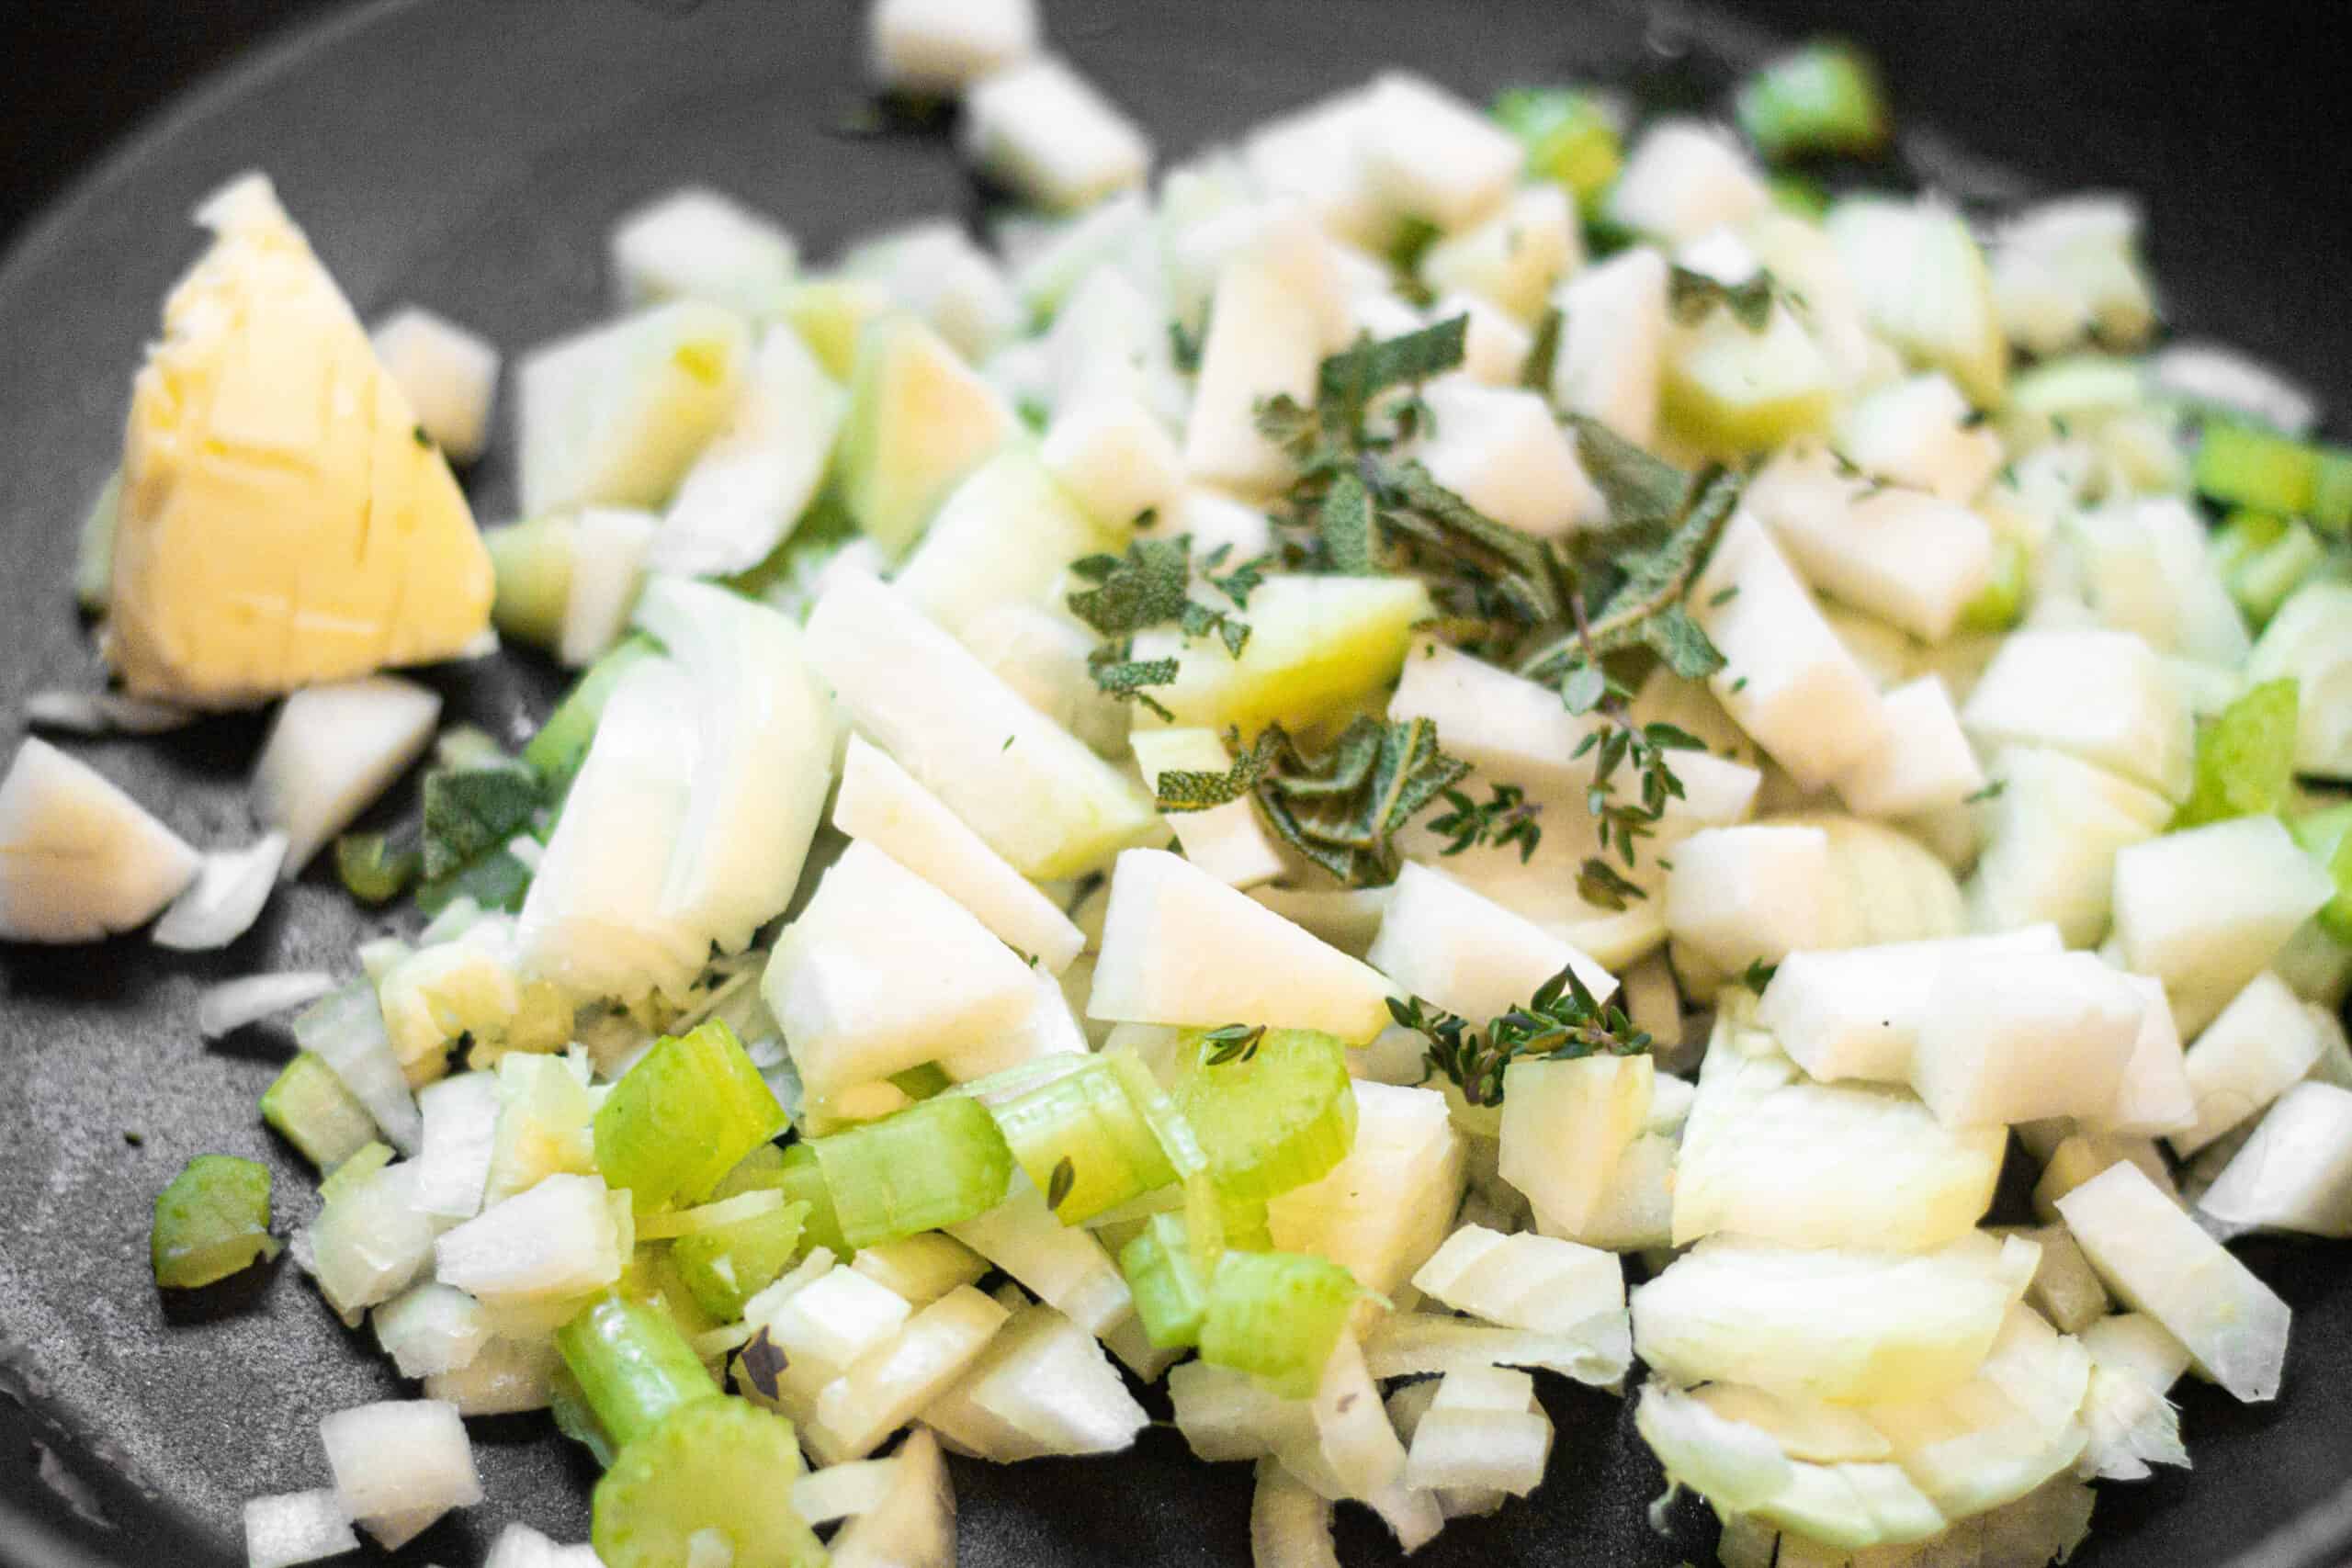 frying up onions, garlic and celery